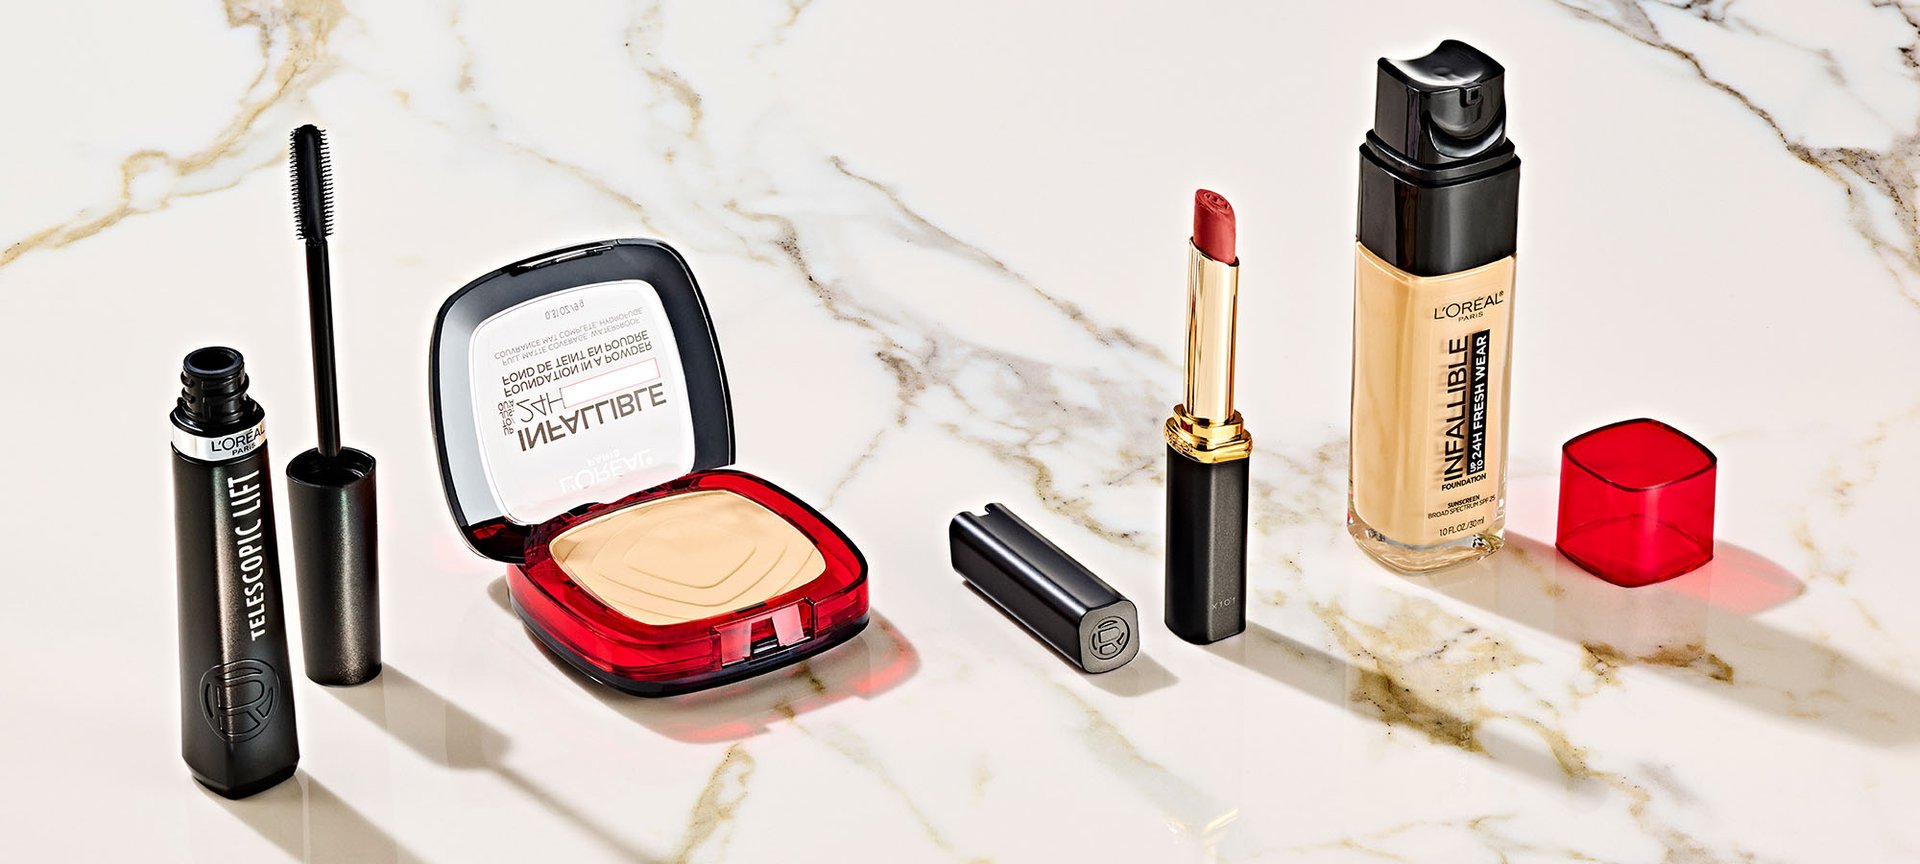 10 Products For A Wedding Makeup Kit